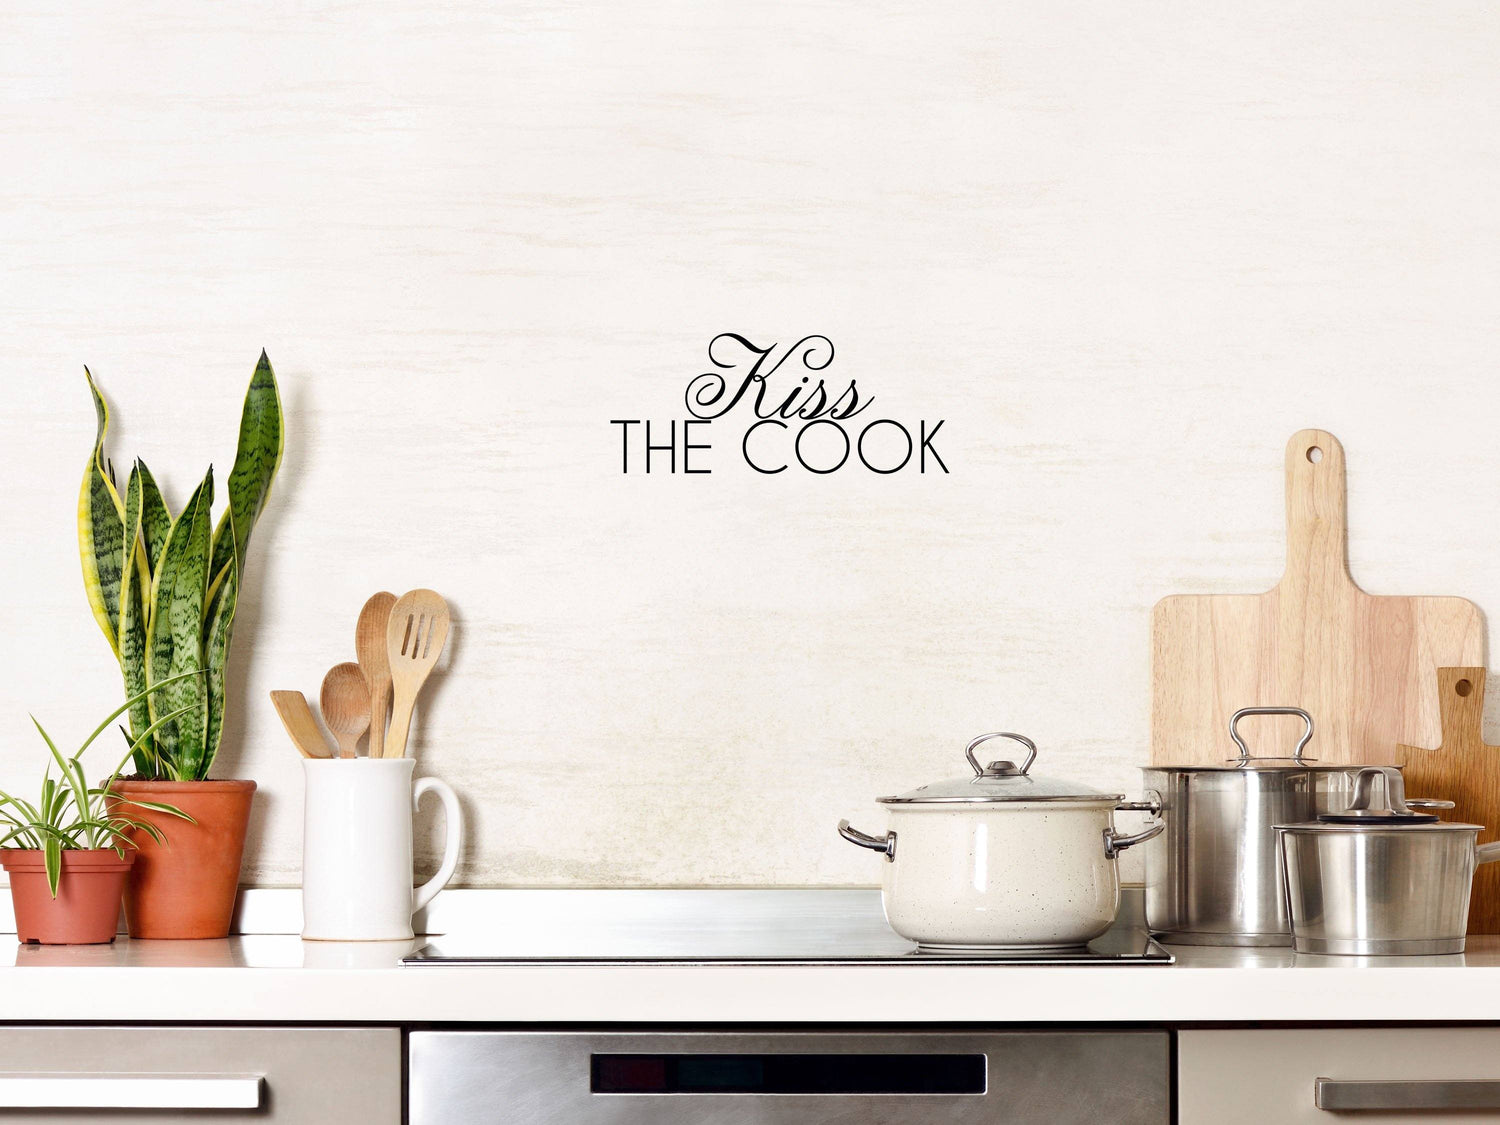 Kiss The Cook Wall Decal - Kiss The Cook Decal - Kitchen Wall Art - Kitchen Wall Decal - Kiss The Cook Wall Decor Vinyl Wall Decal Done 